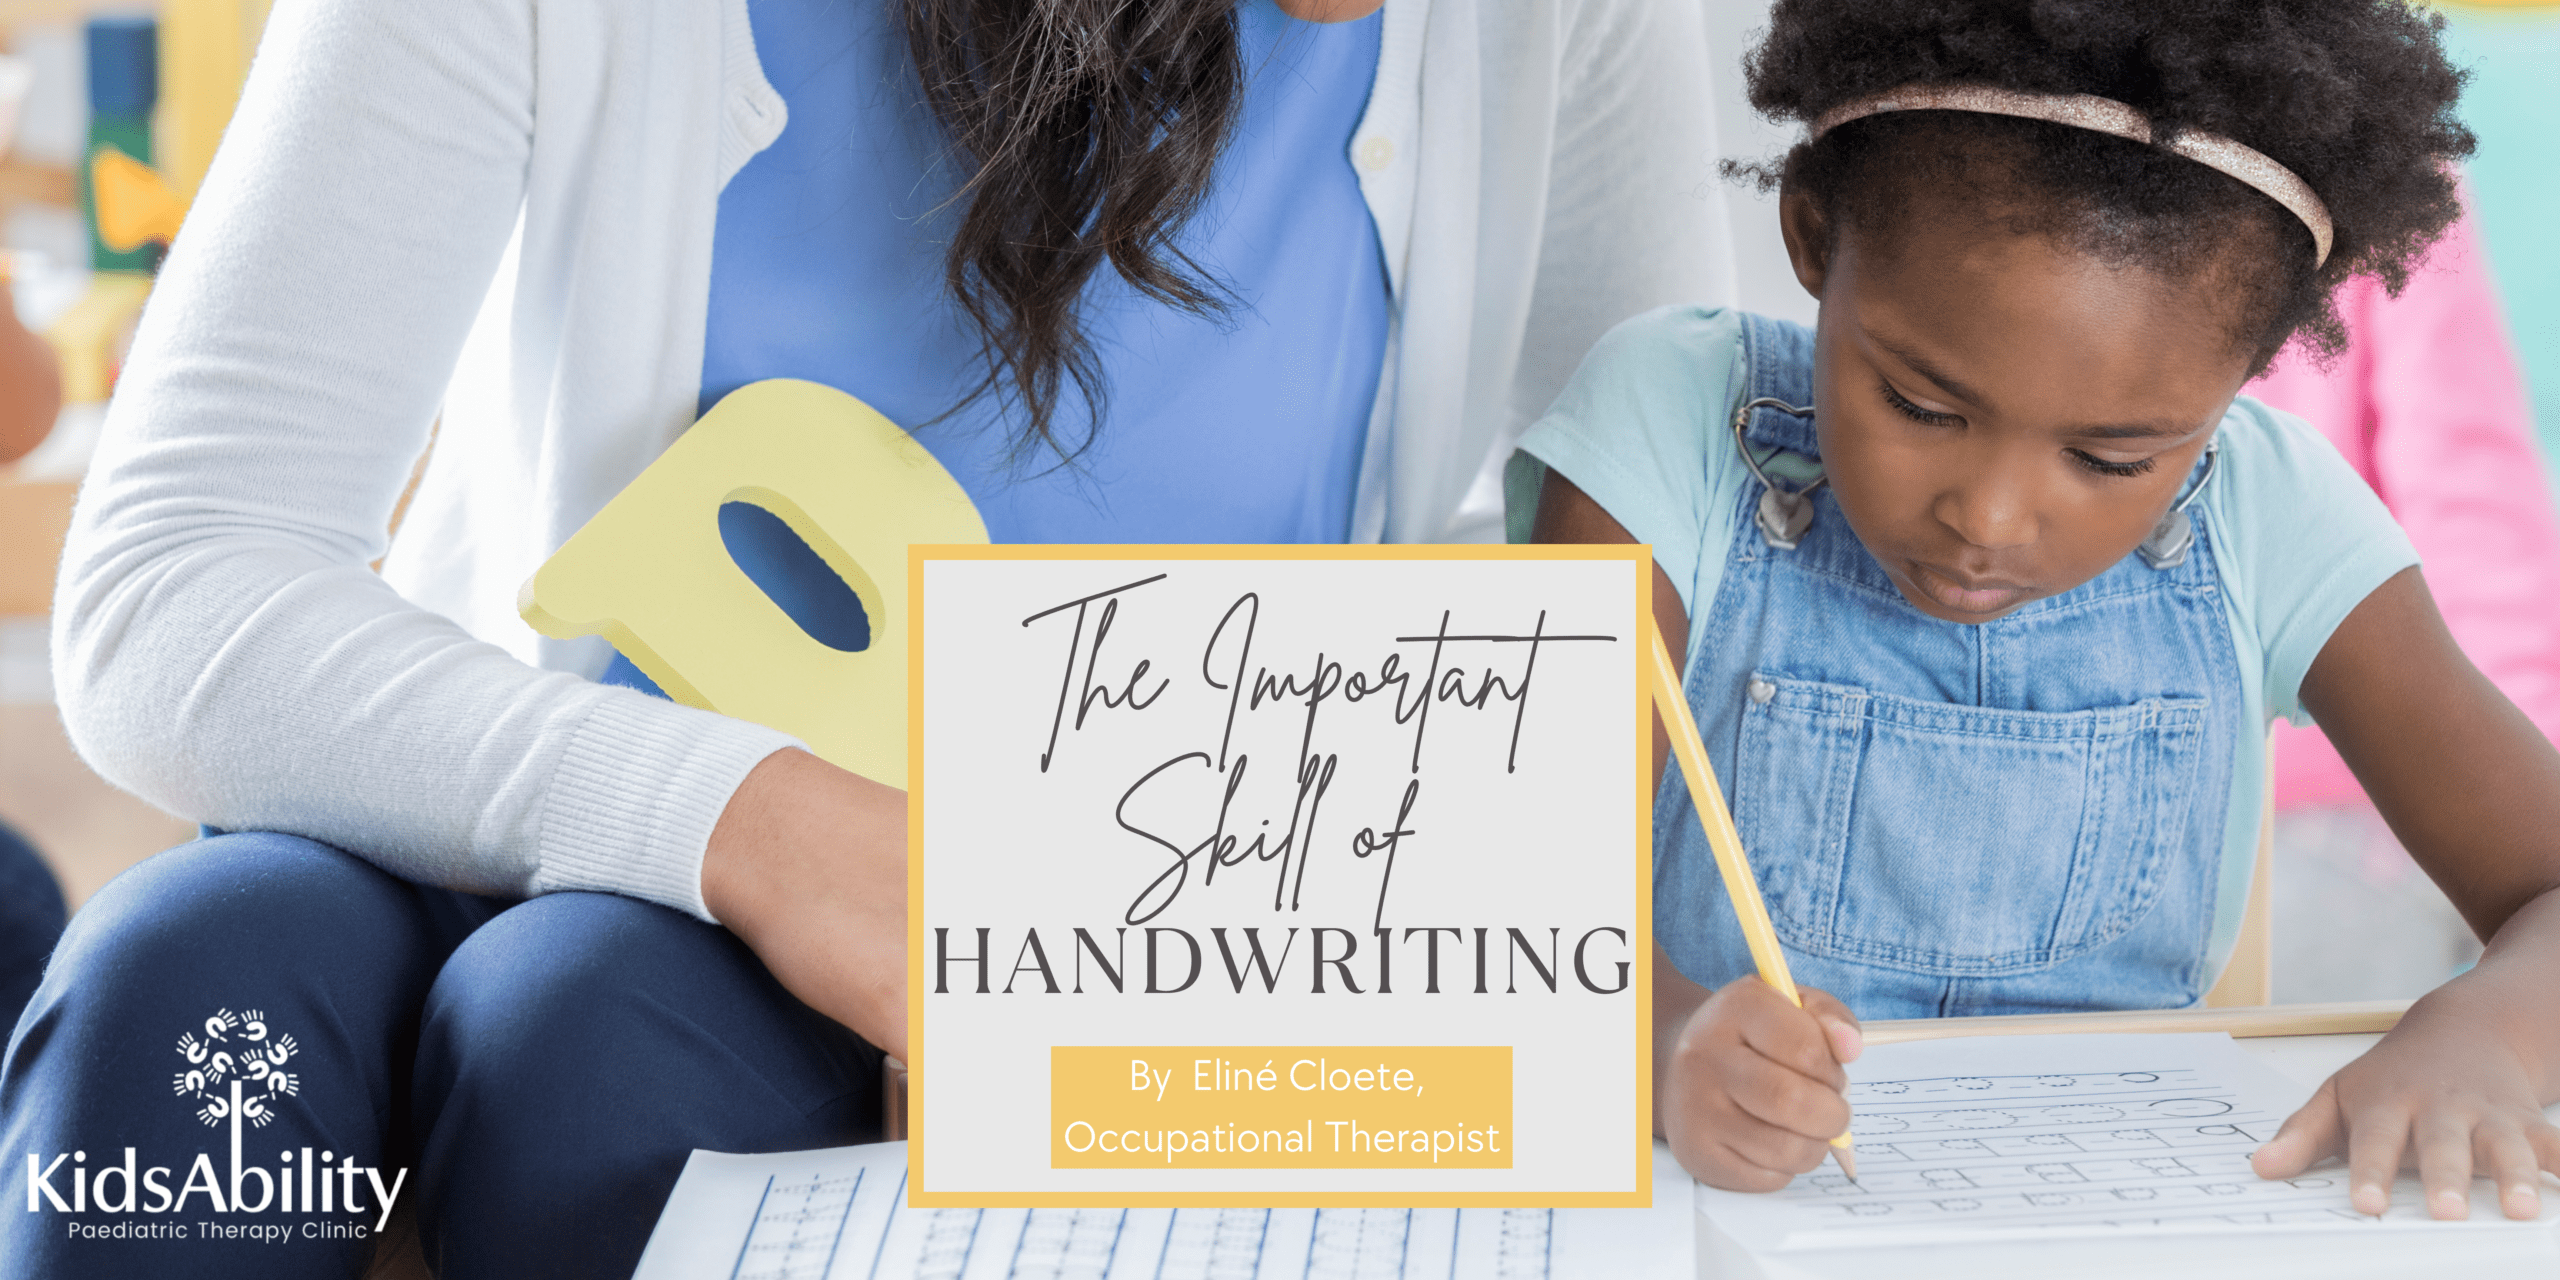 The important skill of handwriting